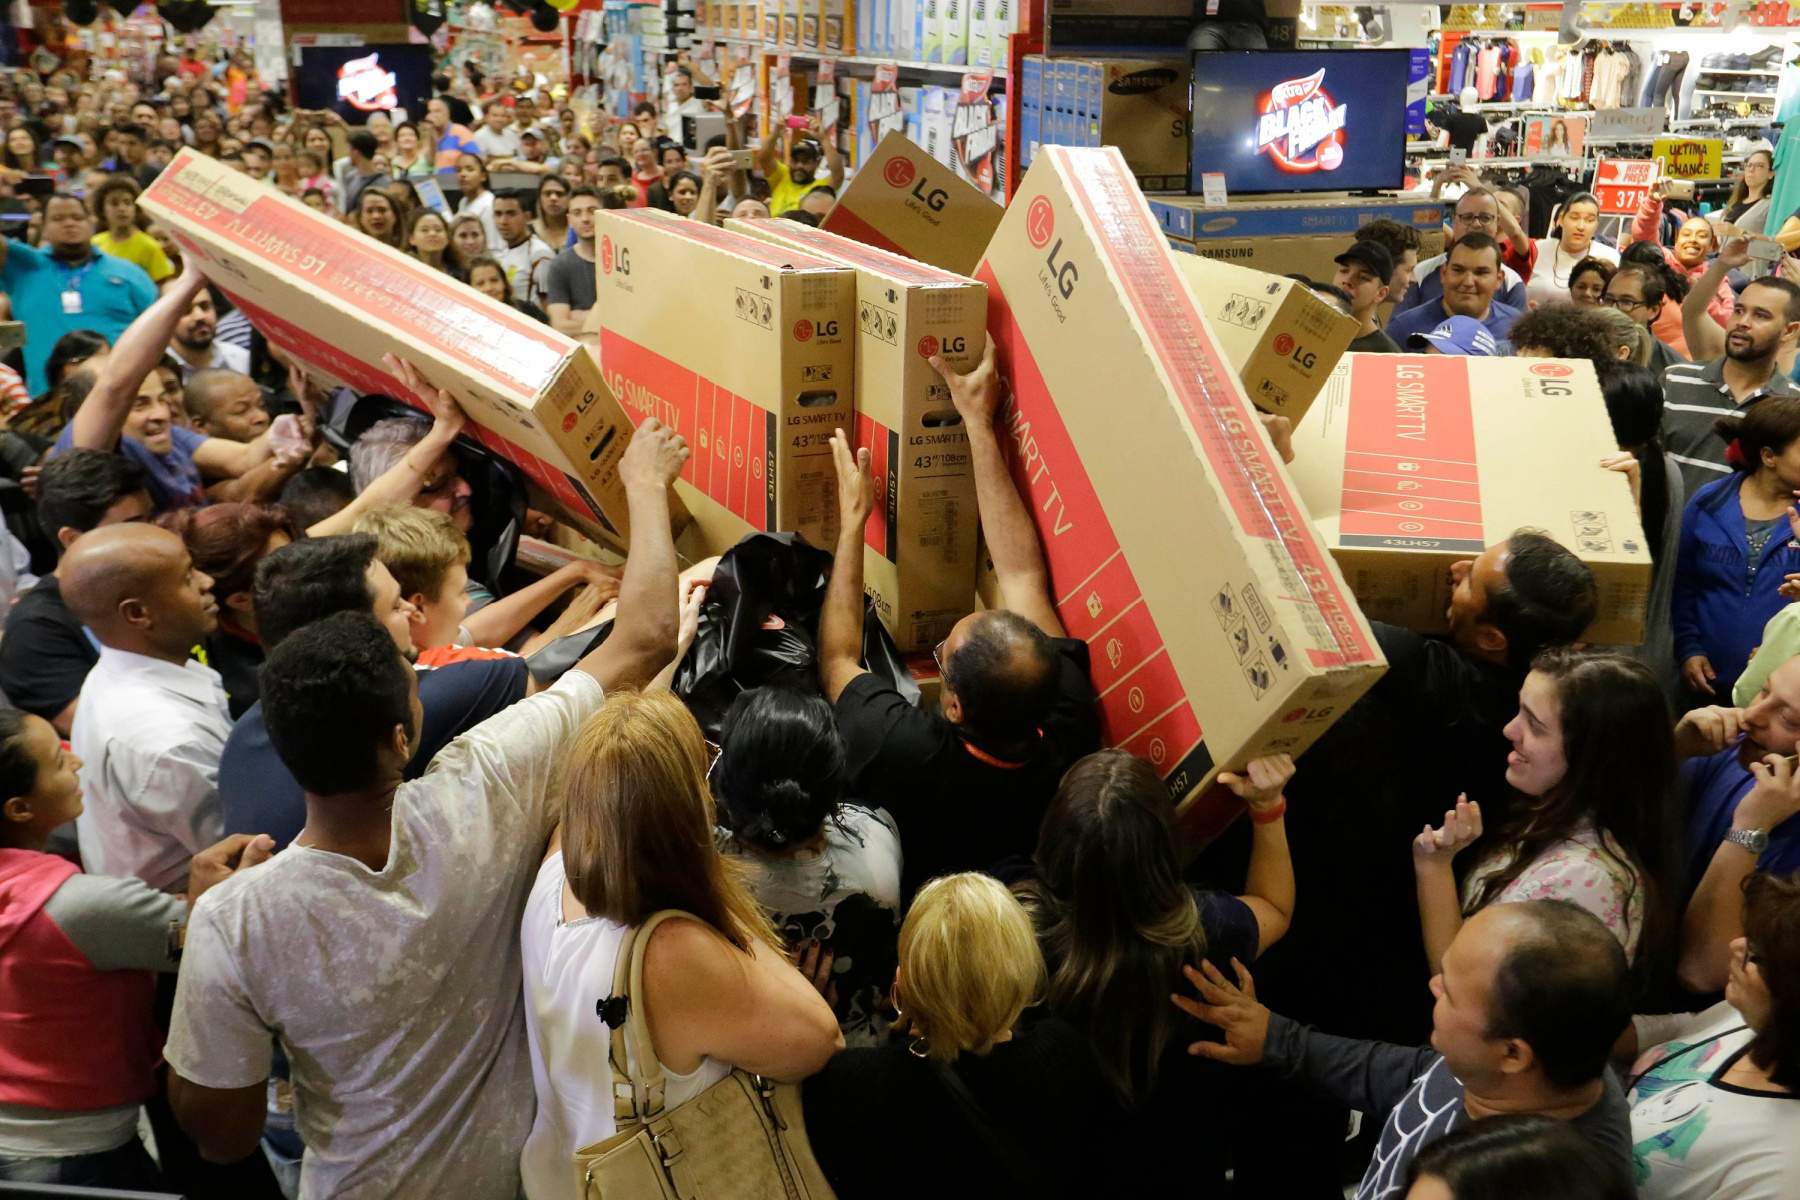 a crowd scrambles for discounted televisions